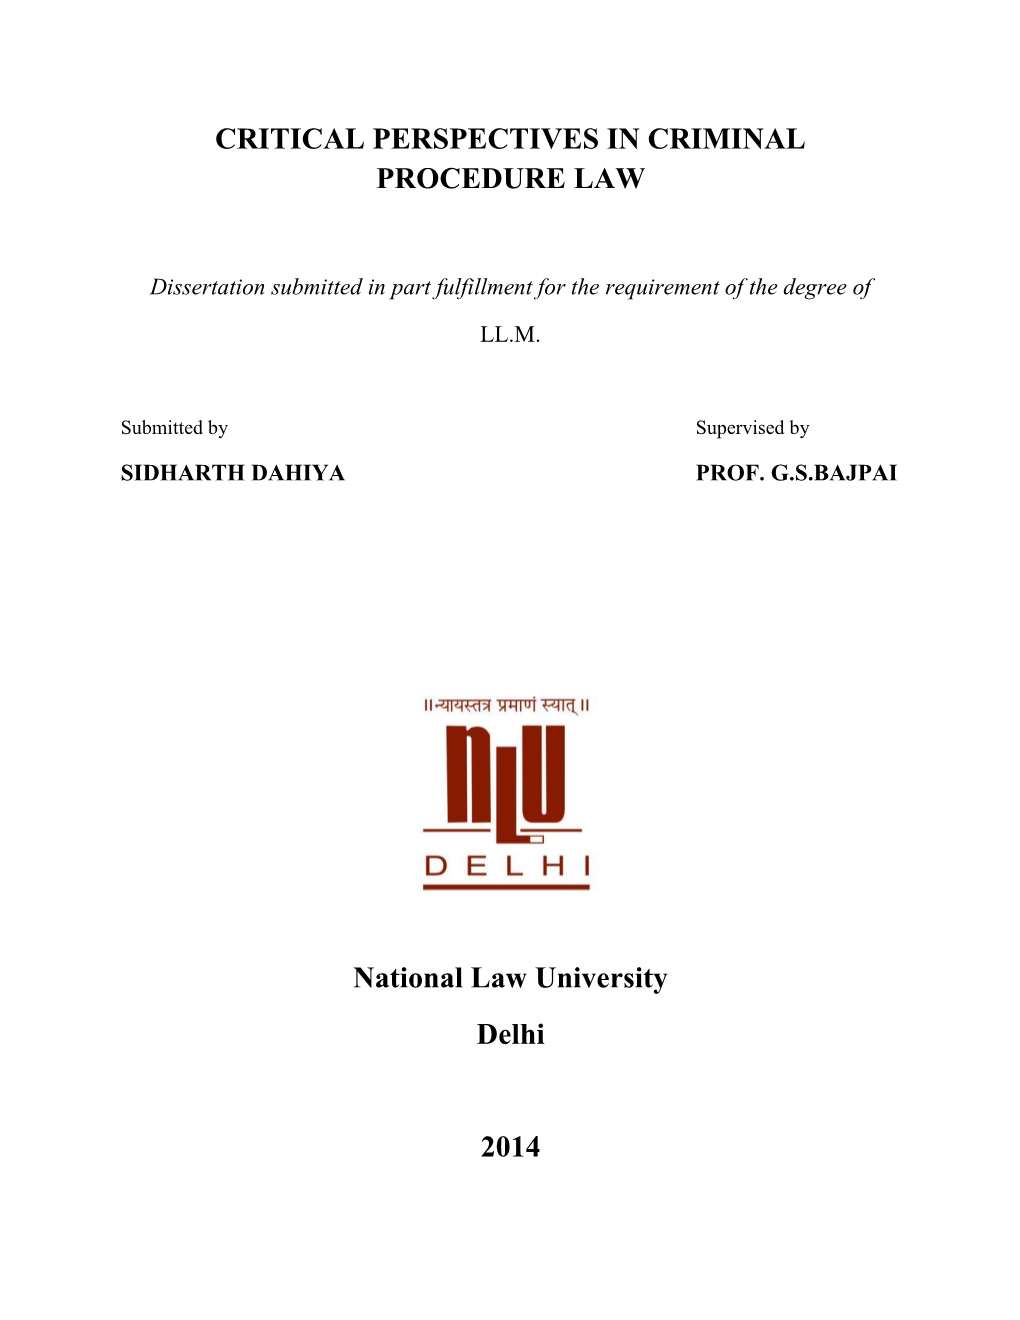 Critical Perspectives in Criminal Procedure Law